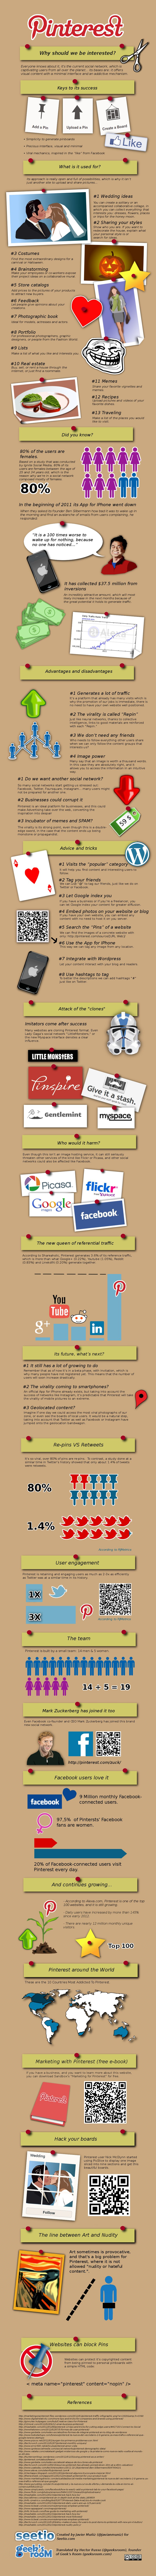 Pinterest: Why Should We Be Interested? [Infographic]